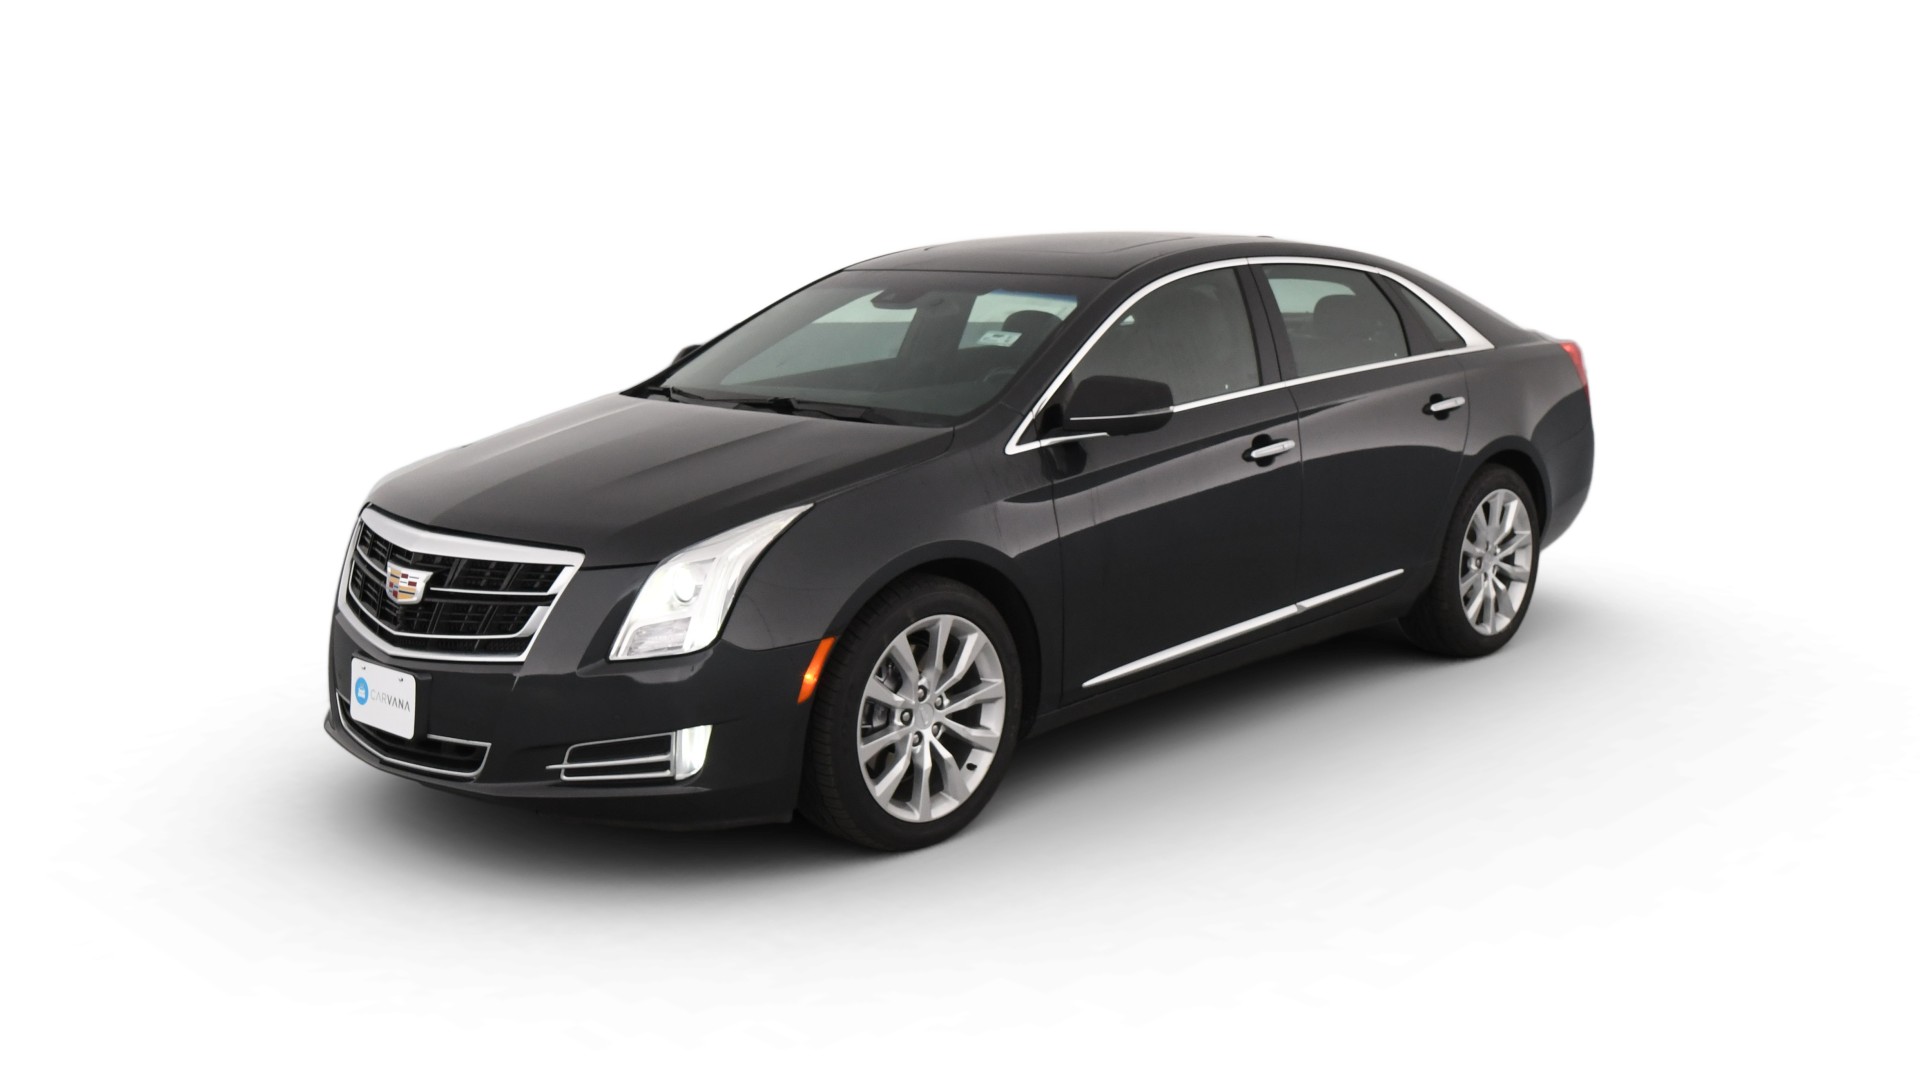 Used Cadillac XTS For Sale Online | Carvana